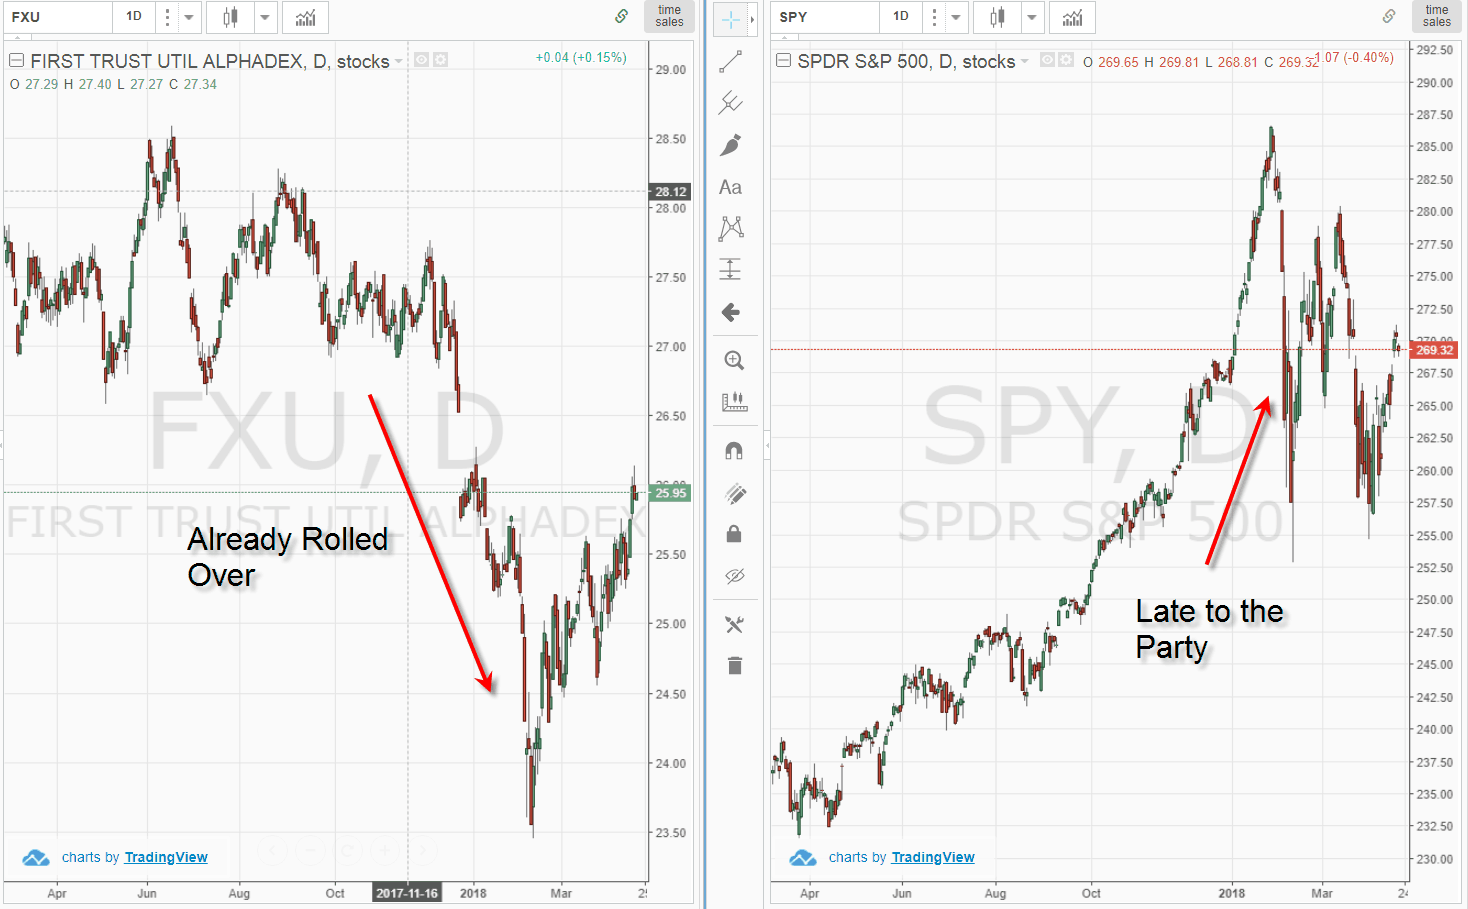 Divergence in Broad Markets